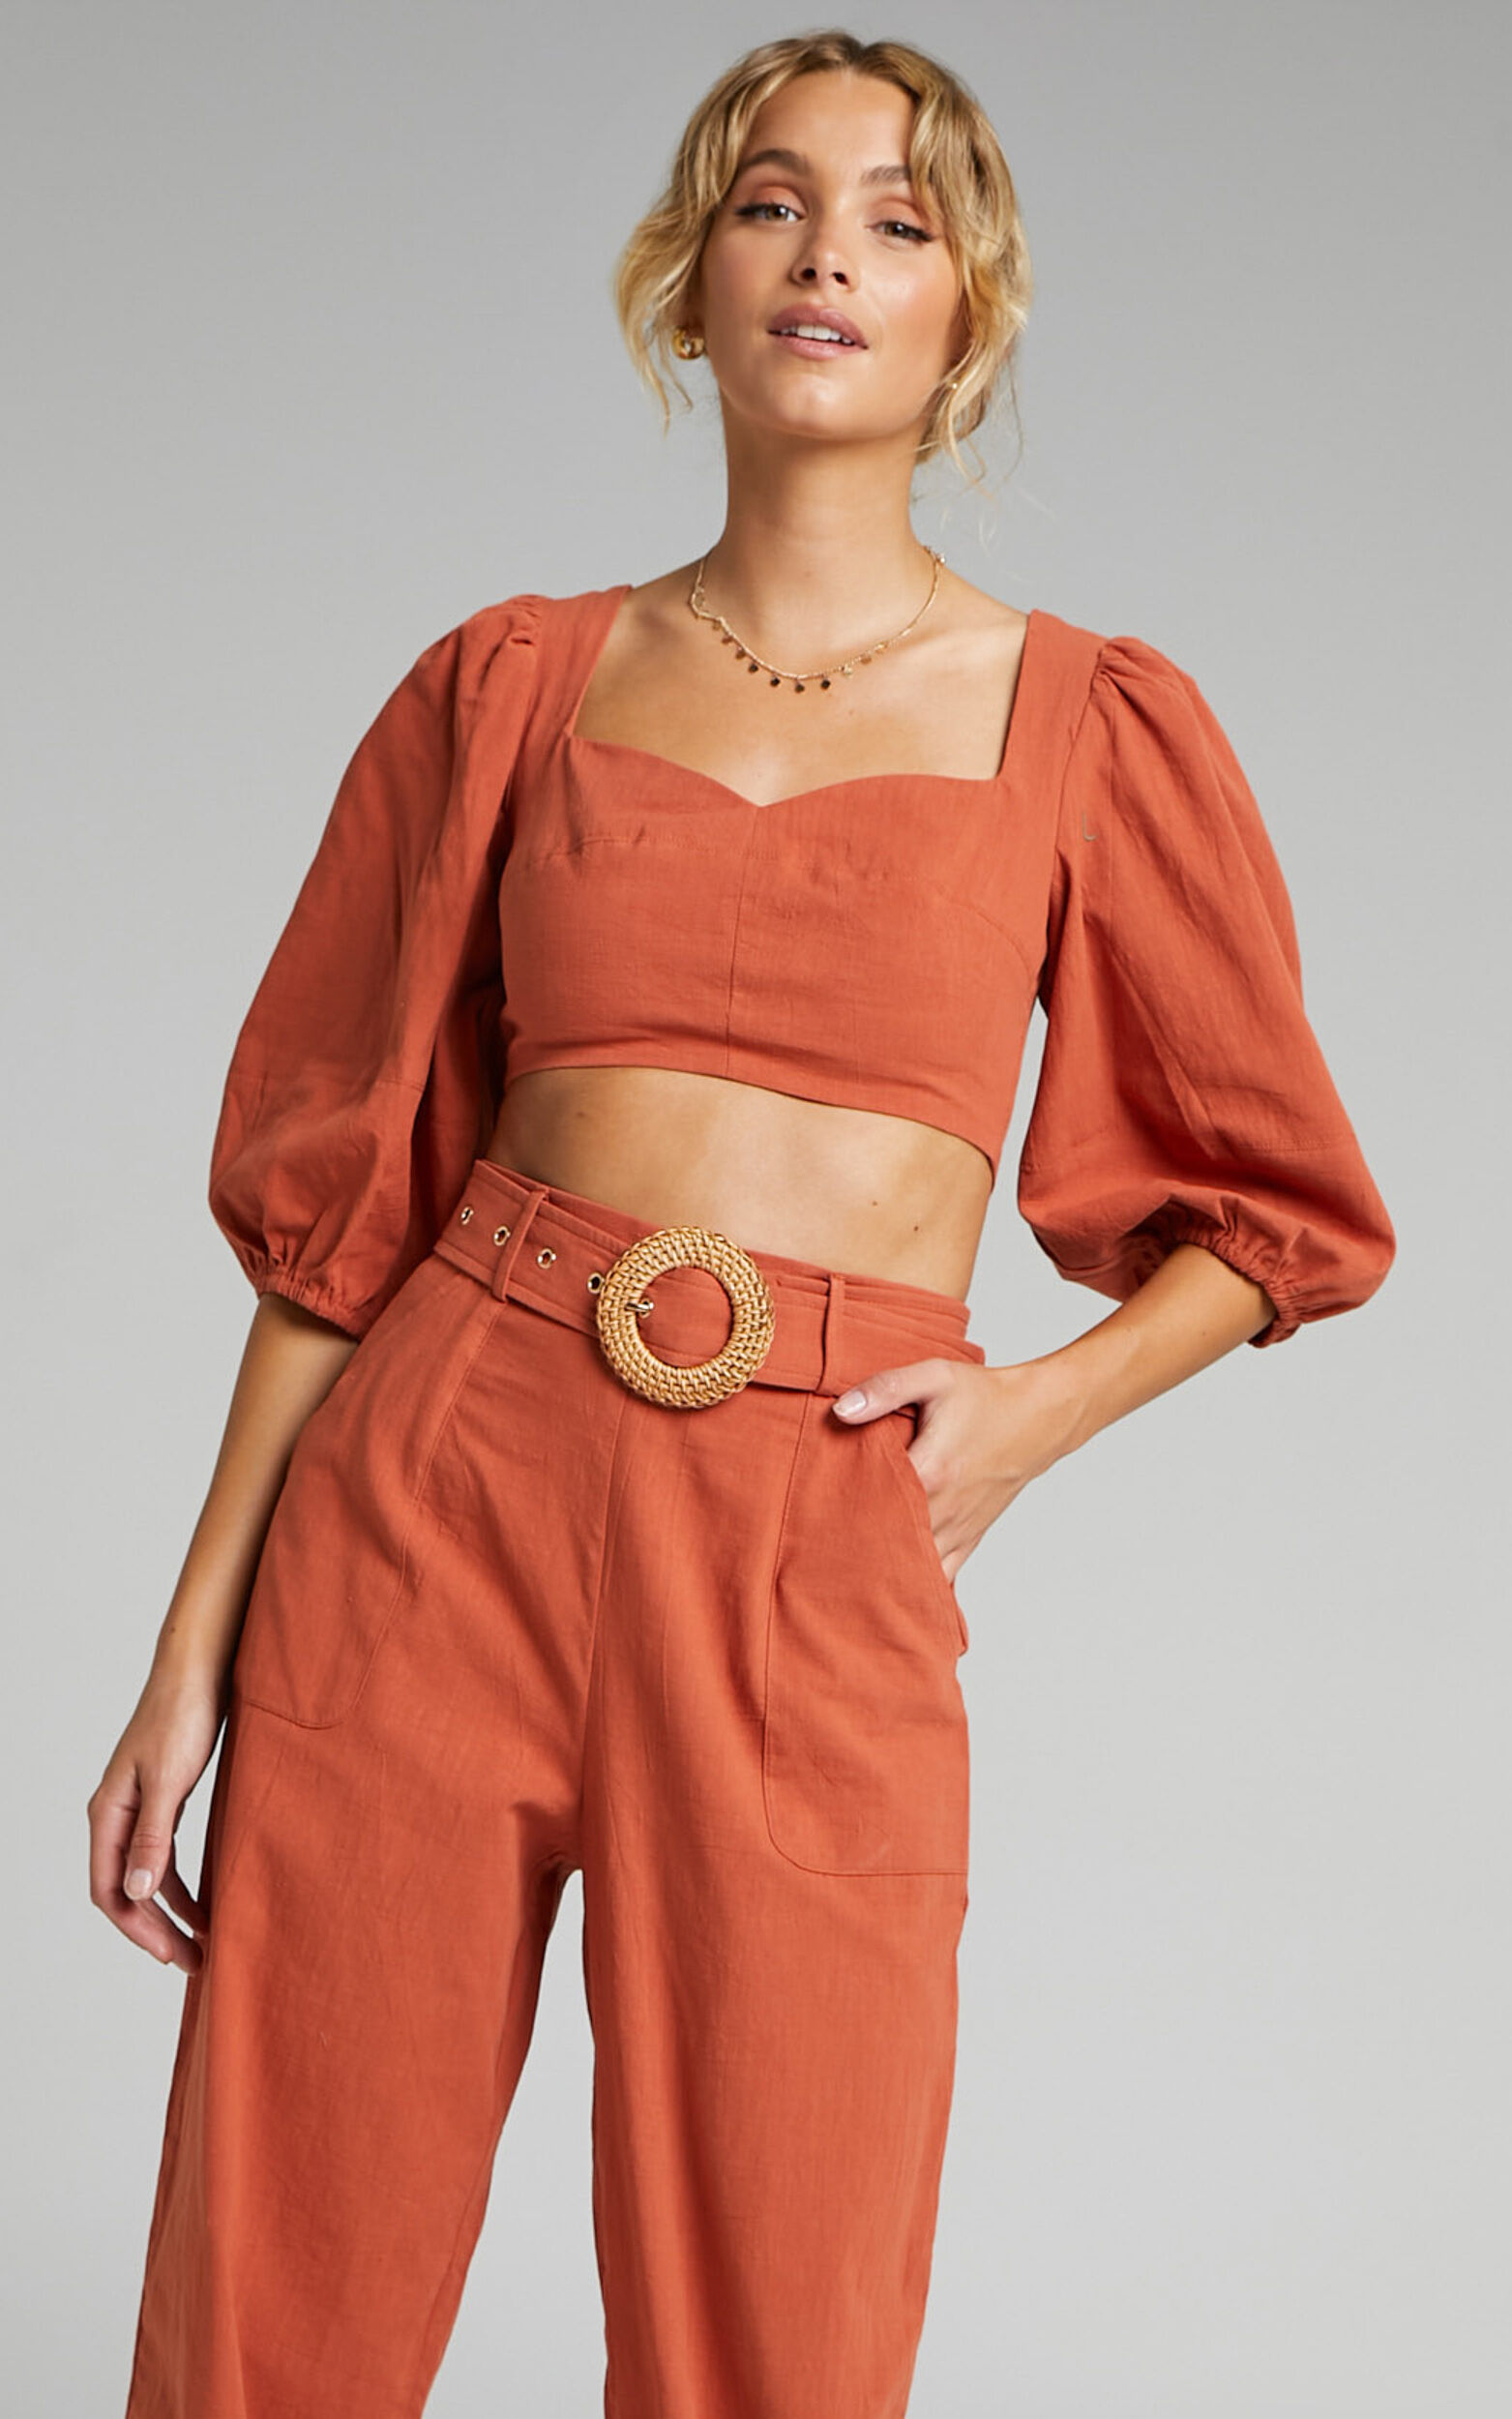 Amalie The Label - Ivy Cotton Puff Sleeve Open Tie Back Crop Top in Pink Clay - 06, BRN1, super-hi-res image number null